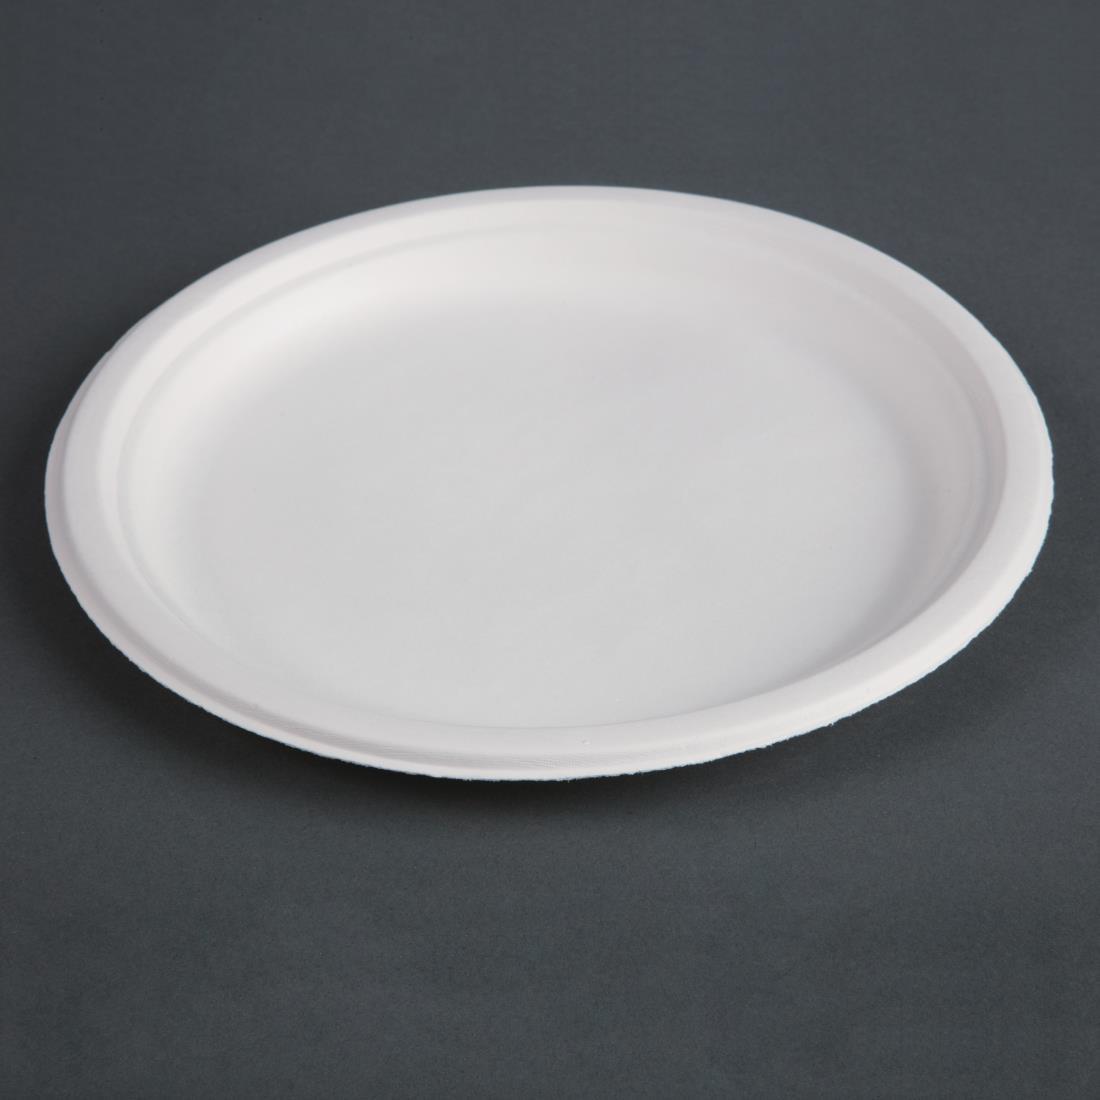 Fiesta Compostable Bagasse Plates Round 260mm (Pack of 50) - CW904  - 2